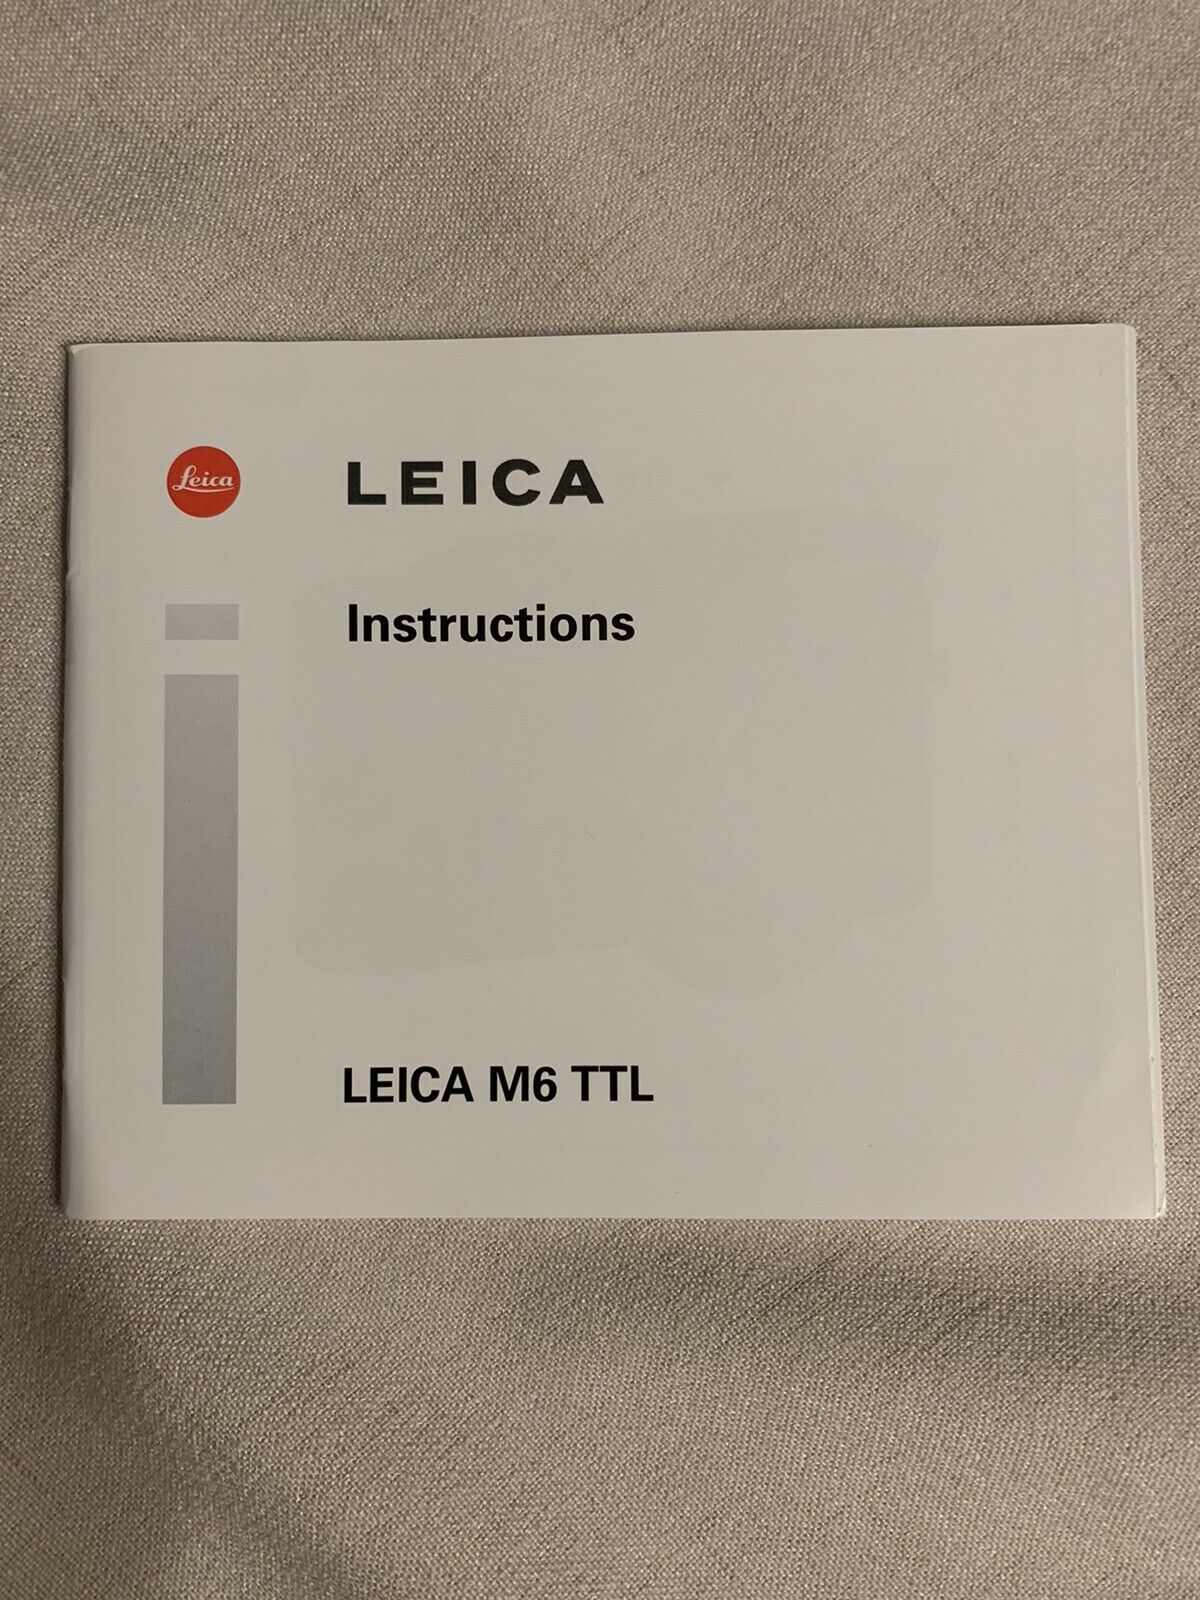 Leica M6 Ttl Instruction Manual In English Very Clean